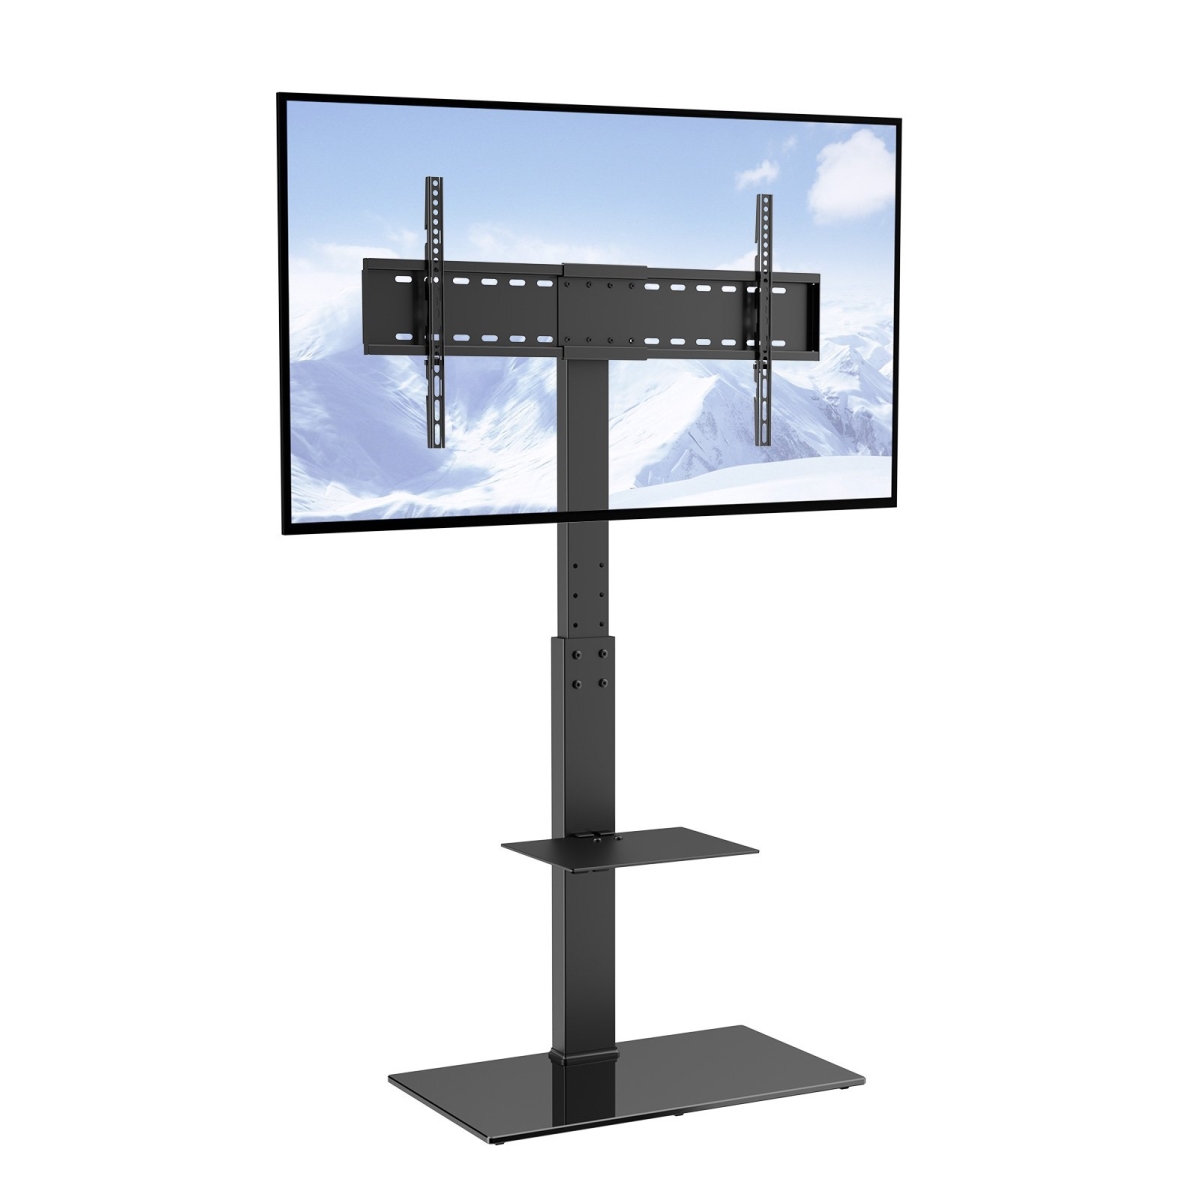 Picture of Vevor LDDSZJGDZXG85G9L8V0 Swivel Tall Adjustable Portable Floor TV Stand for 32 to 85 in. TV